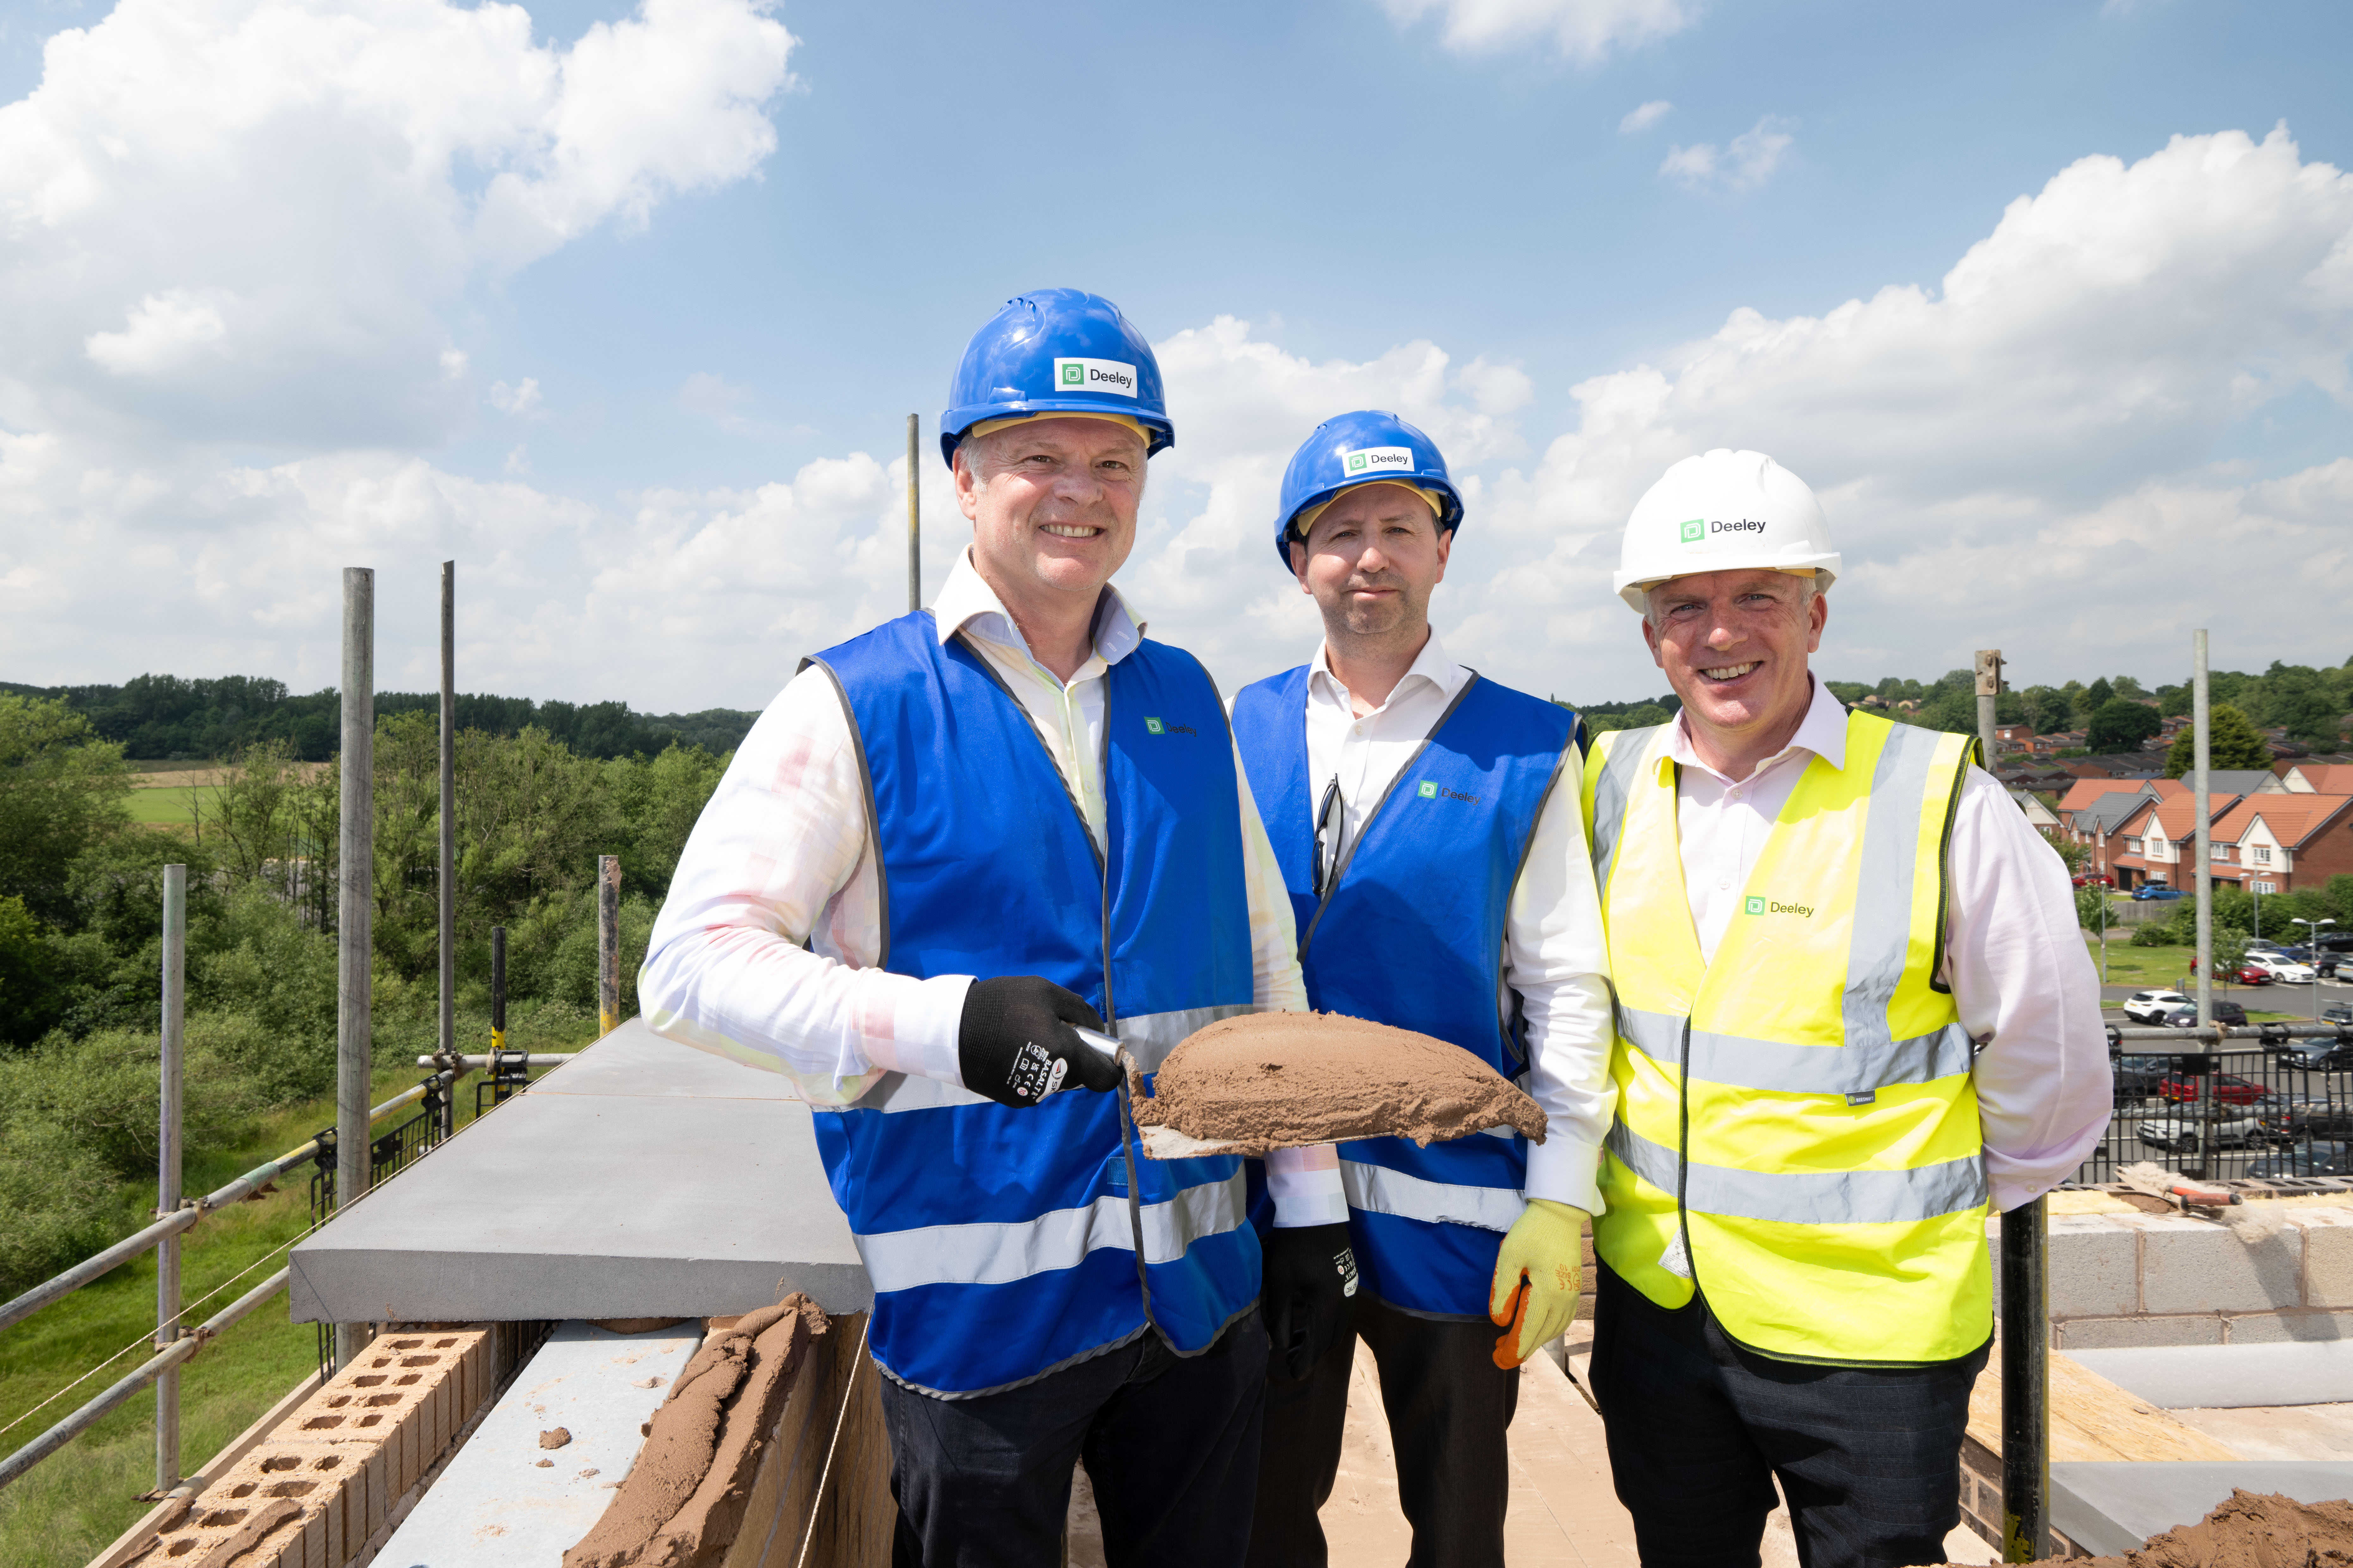 Photo caption: Richard Frank (Preferred Homes), Michael Keogh (Nuveen) and Martin Gallagher (Deeley Construction) at the topping out ceremony.